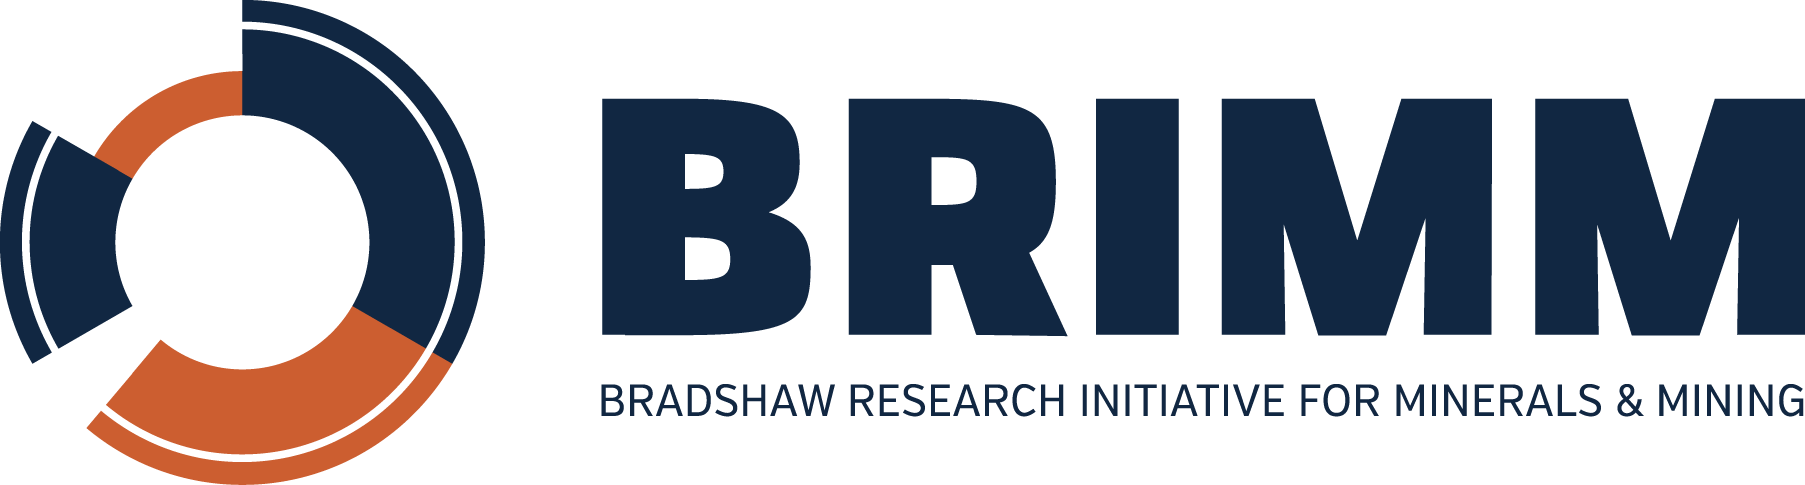 UBC BRIMM - Bradshaw Research Institute for Minerals and Mining